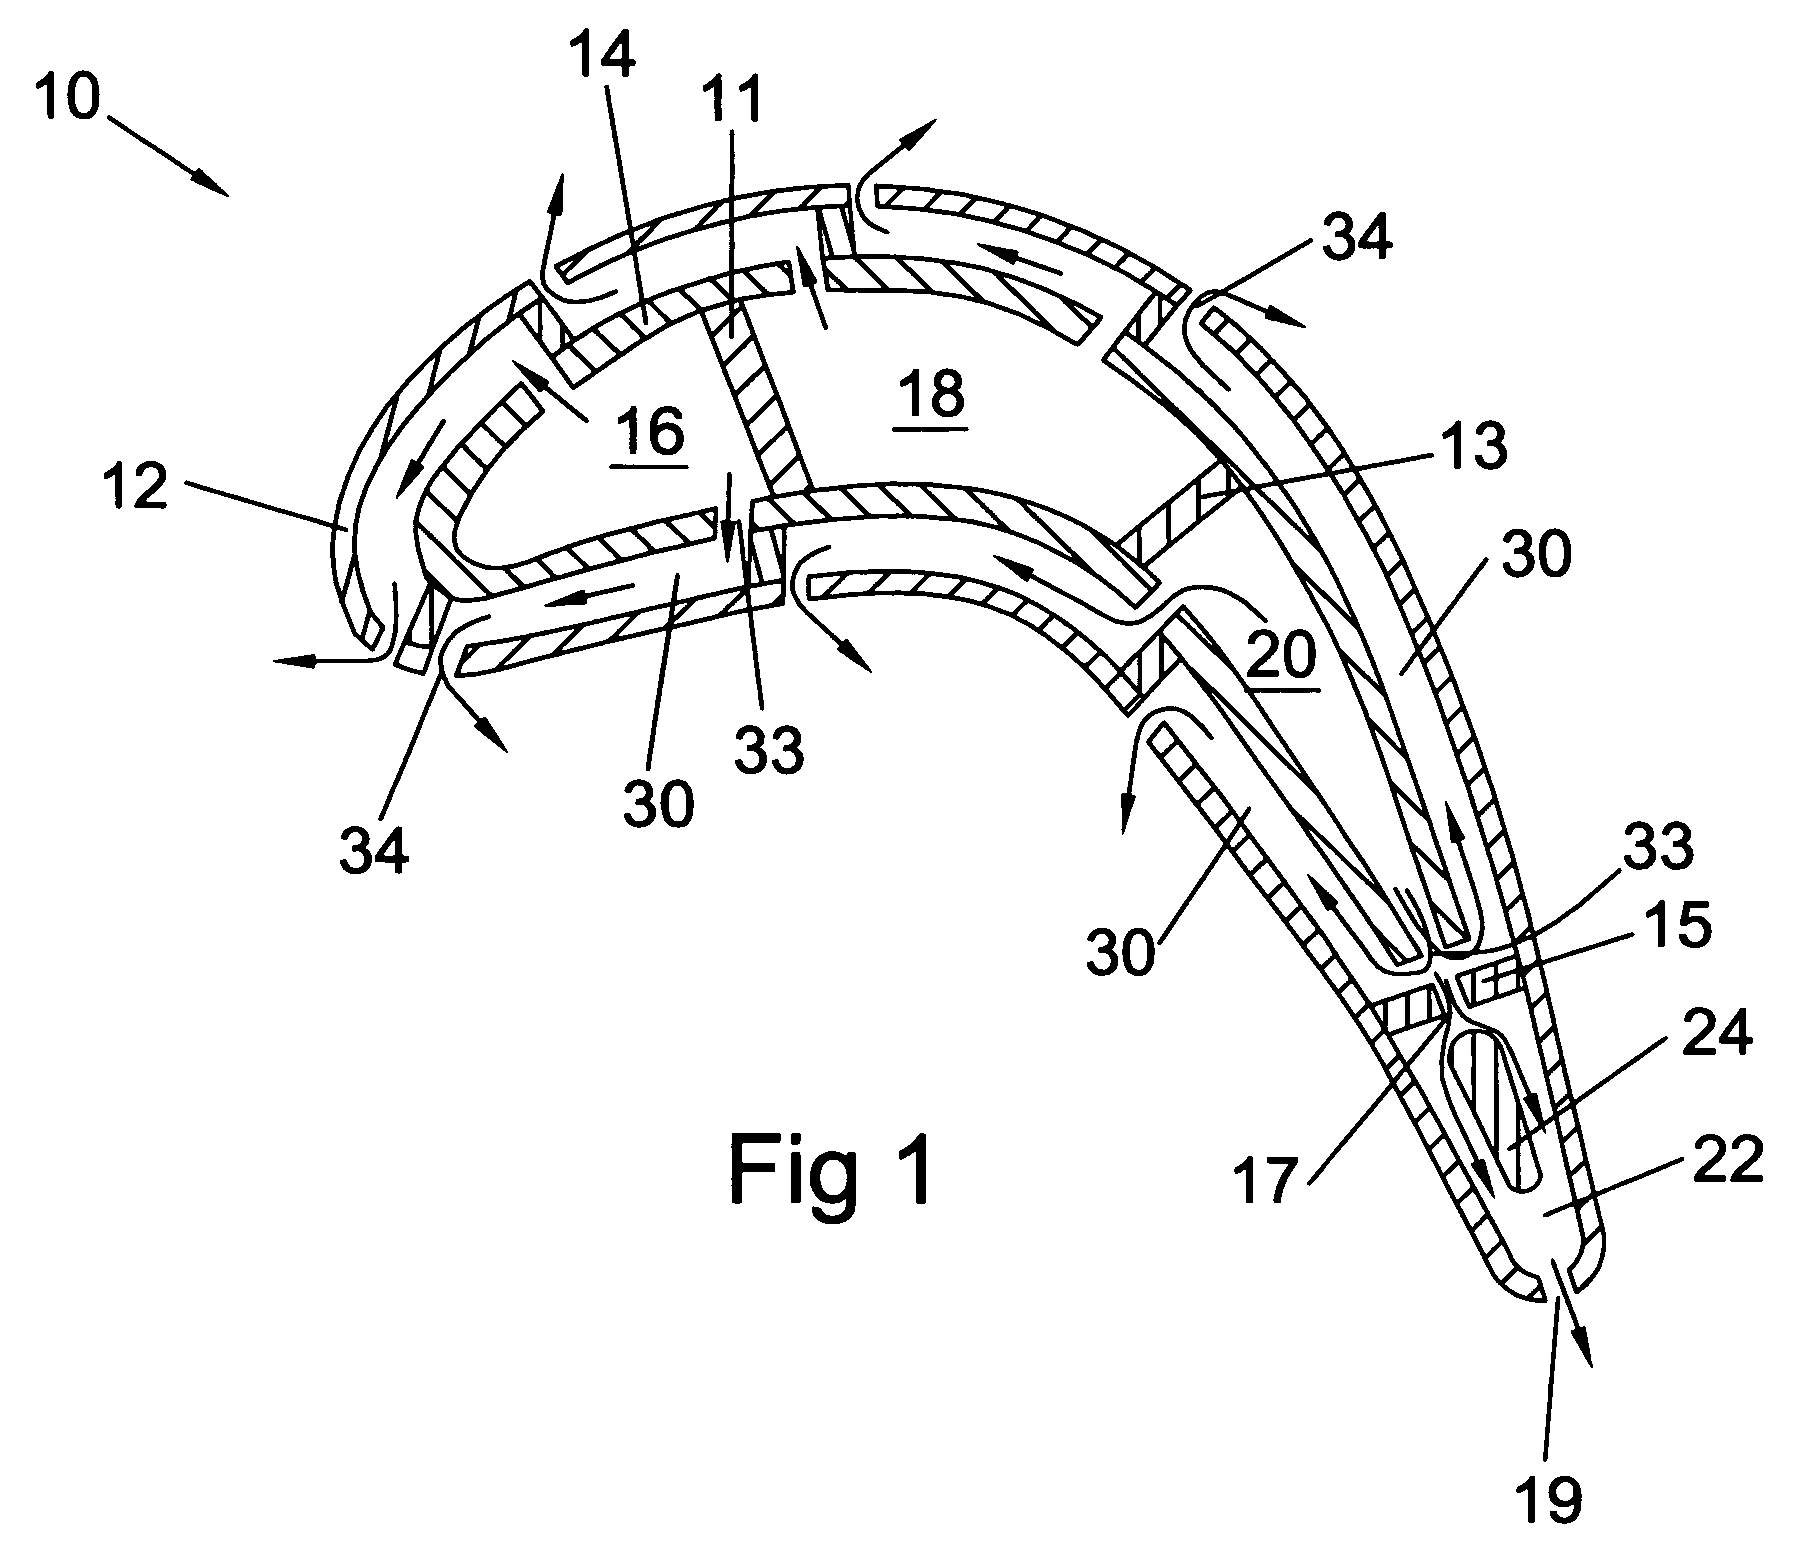 Turbine airfoil with mini-serpentine cooling passages